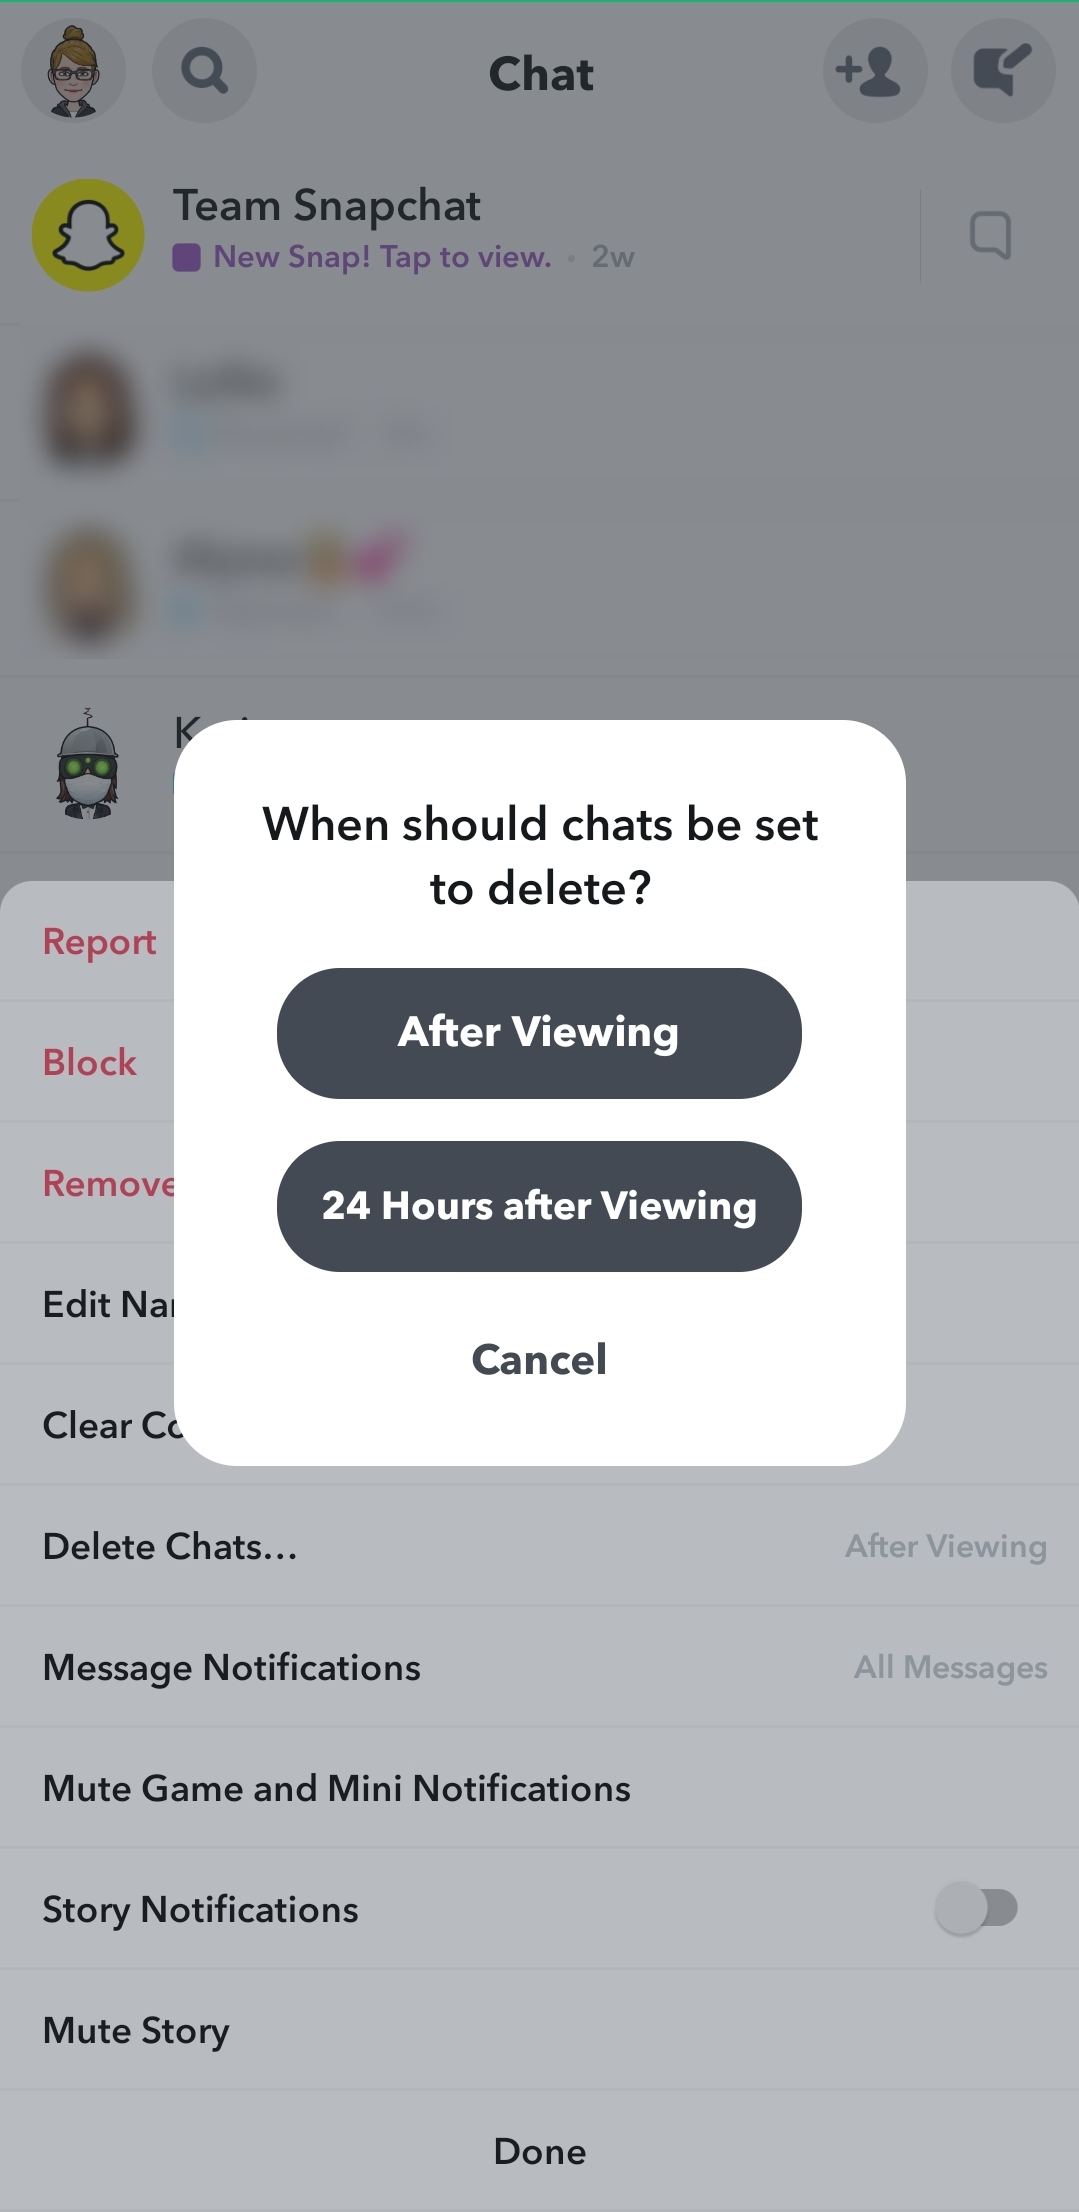 Does Snapchat Automatically Delete Conversations?